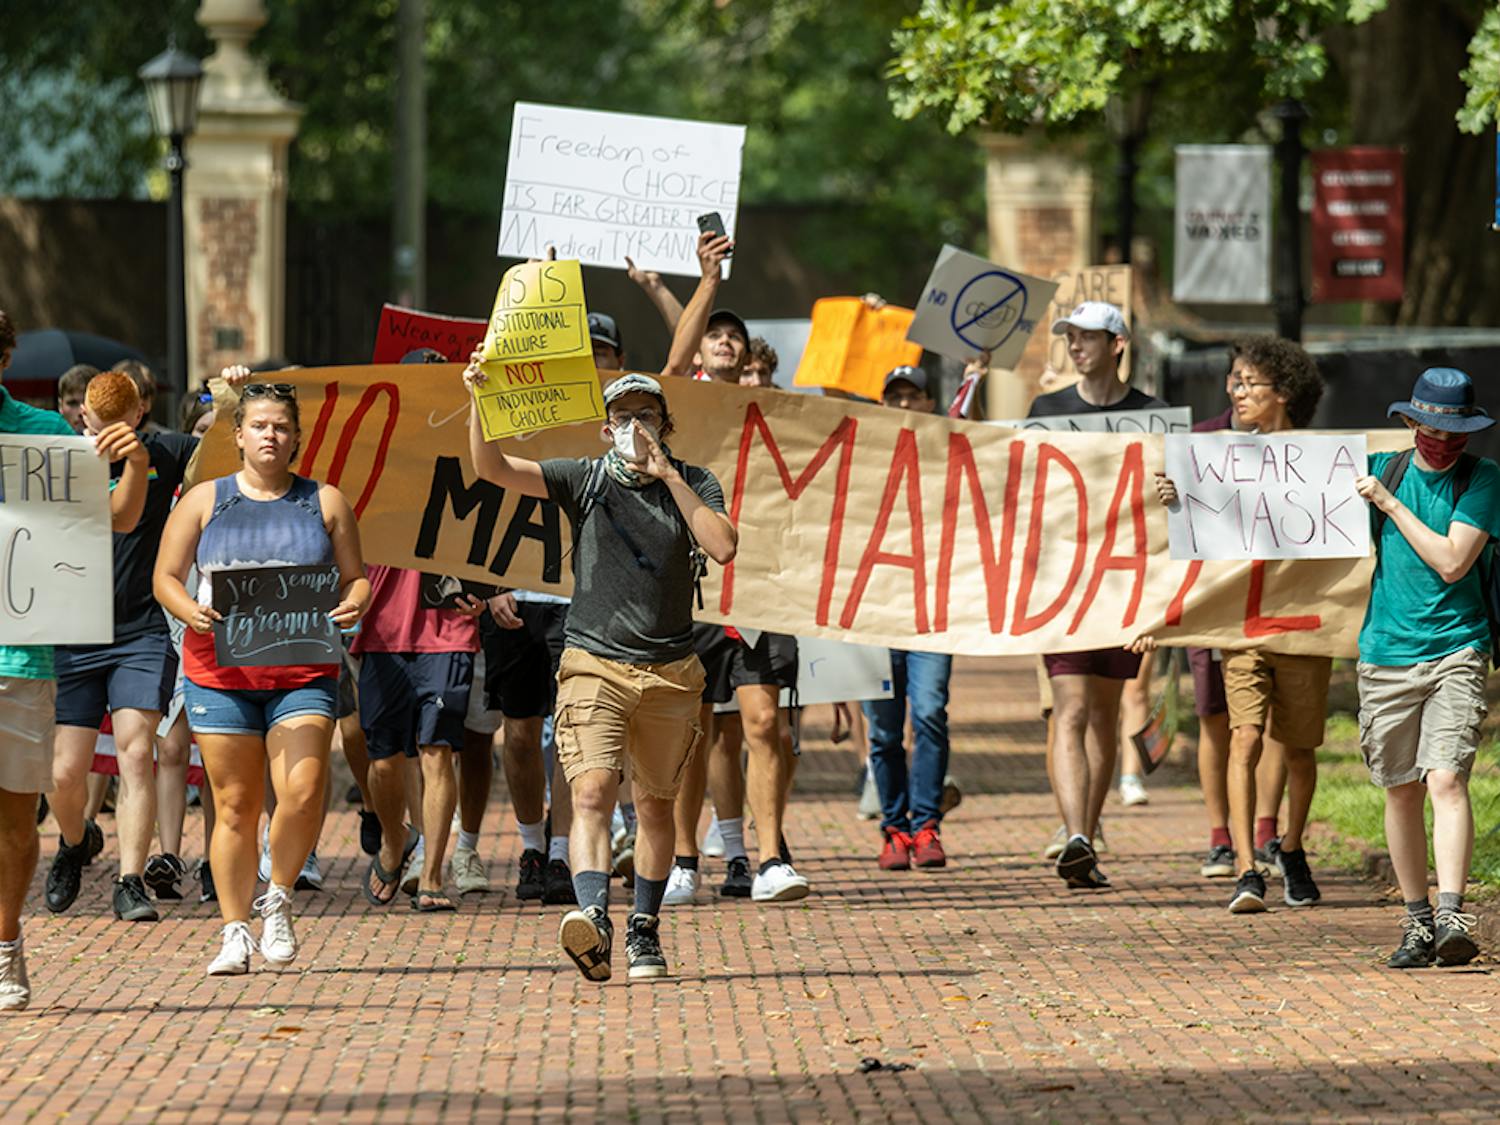 The USC Turning Point USA chapter protests on the Horseshoe over the mask mandate while the Carolina Socialists counterprotest. The mask mandate was put in place by interim university President Harris Pastides on Aug. 18, 2021.